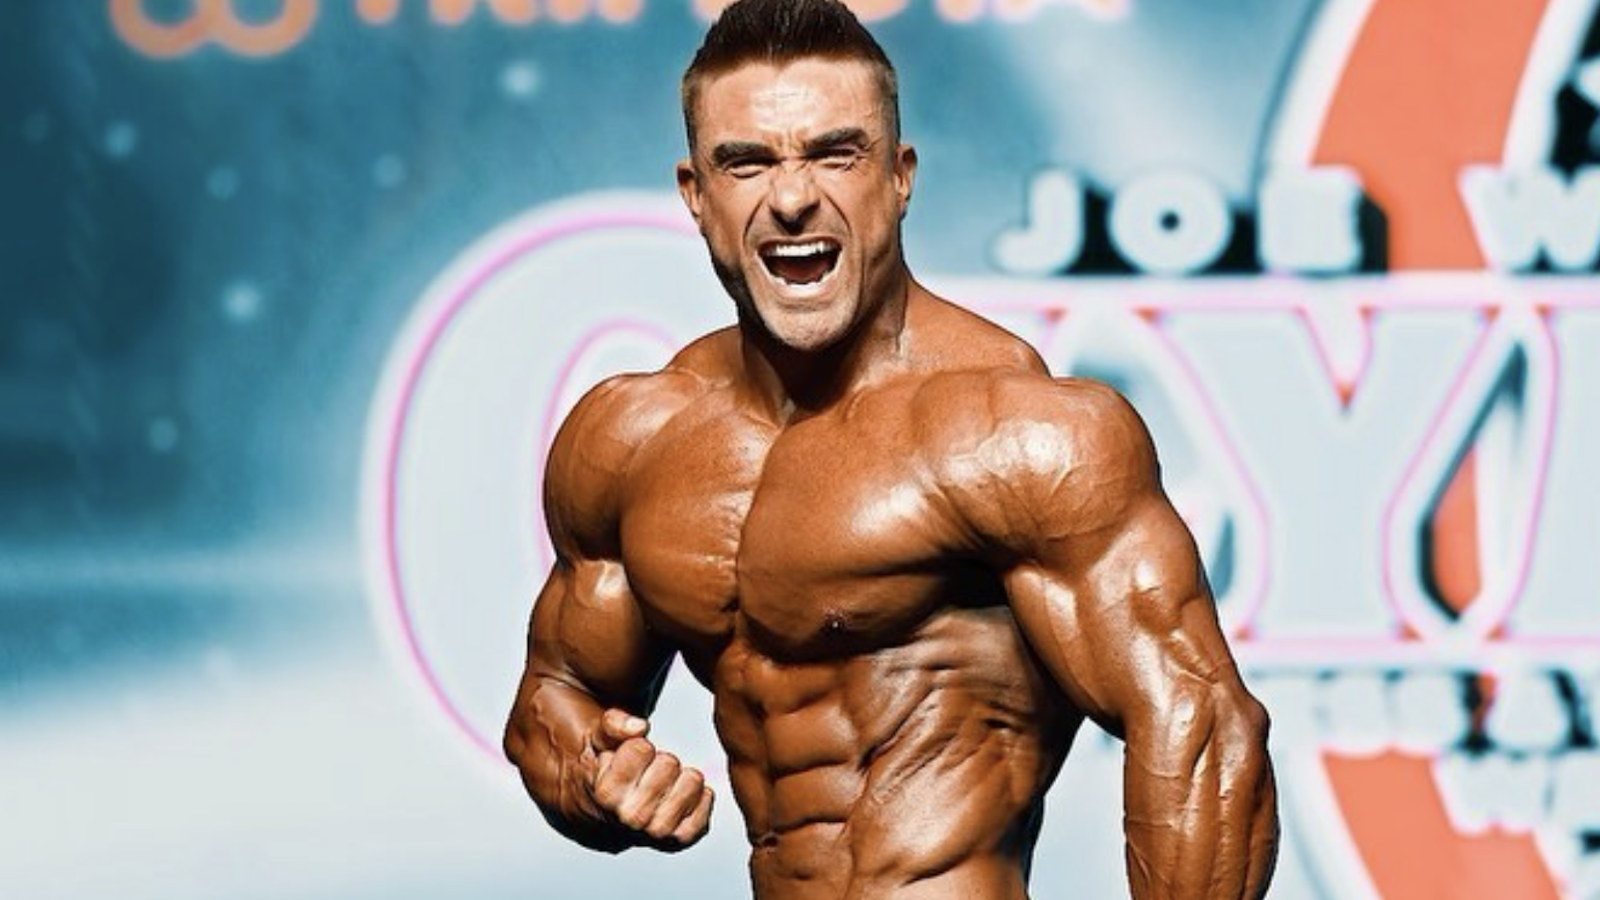 Ryan Terry Wins 2023 Men's Physique Olympia Title